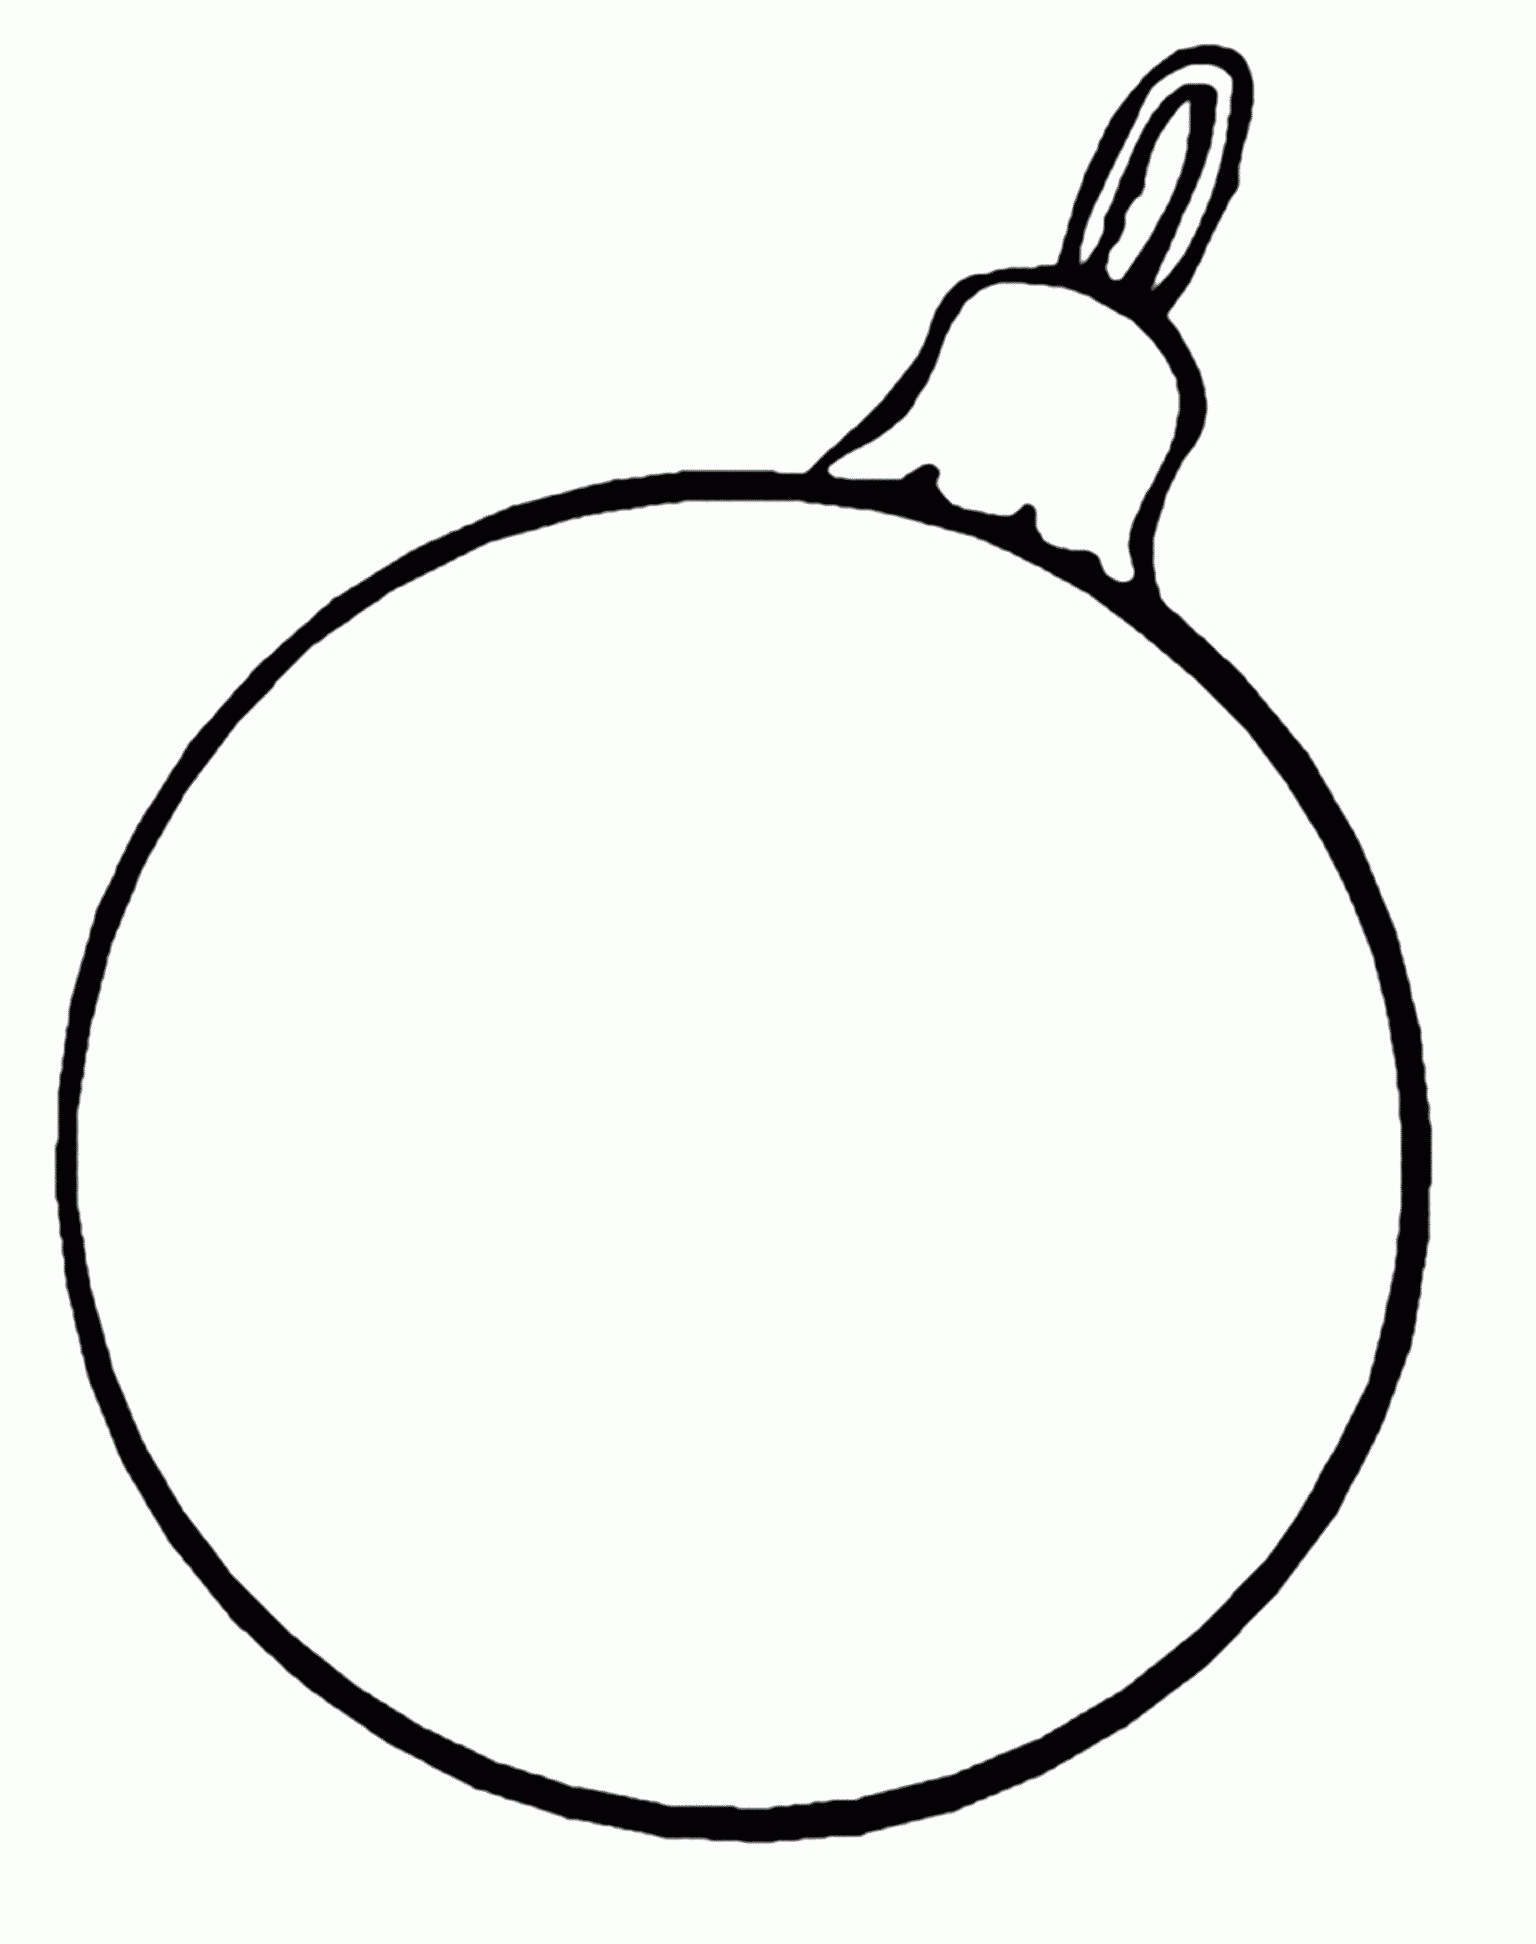 Christmas Ornament Coloring Pages For Girls - Coloring Pages For ...